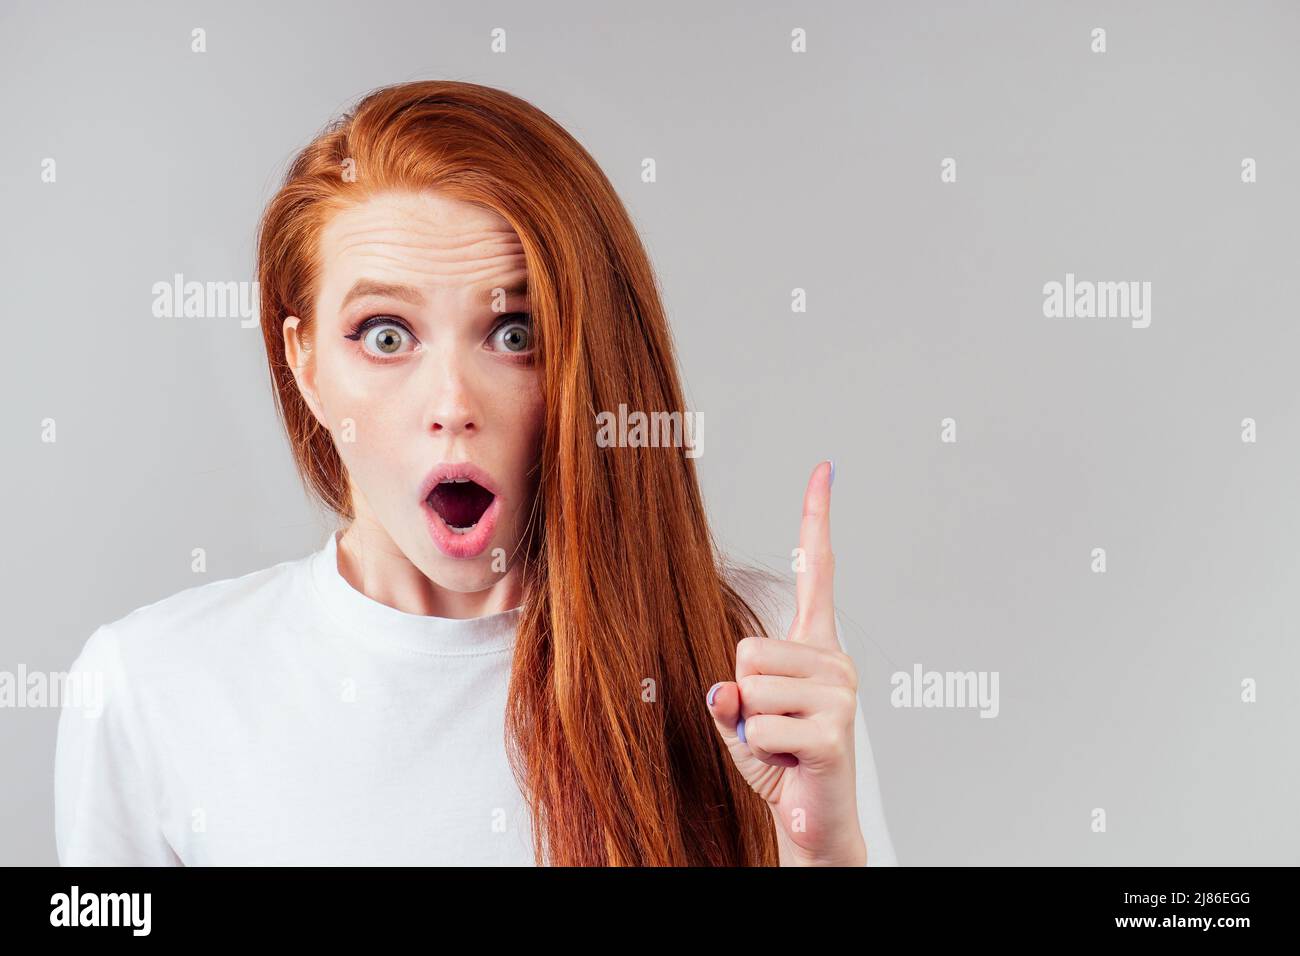 redhair ginger woman finger pointing copy space Stock Photo